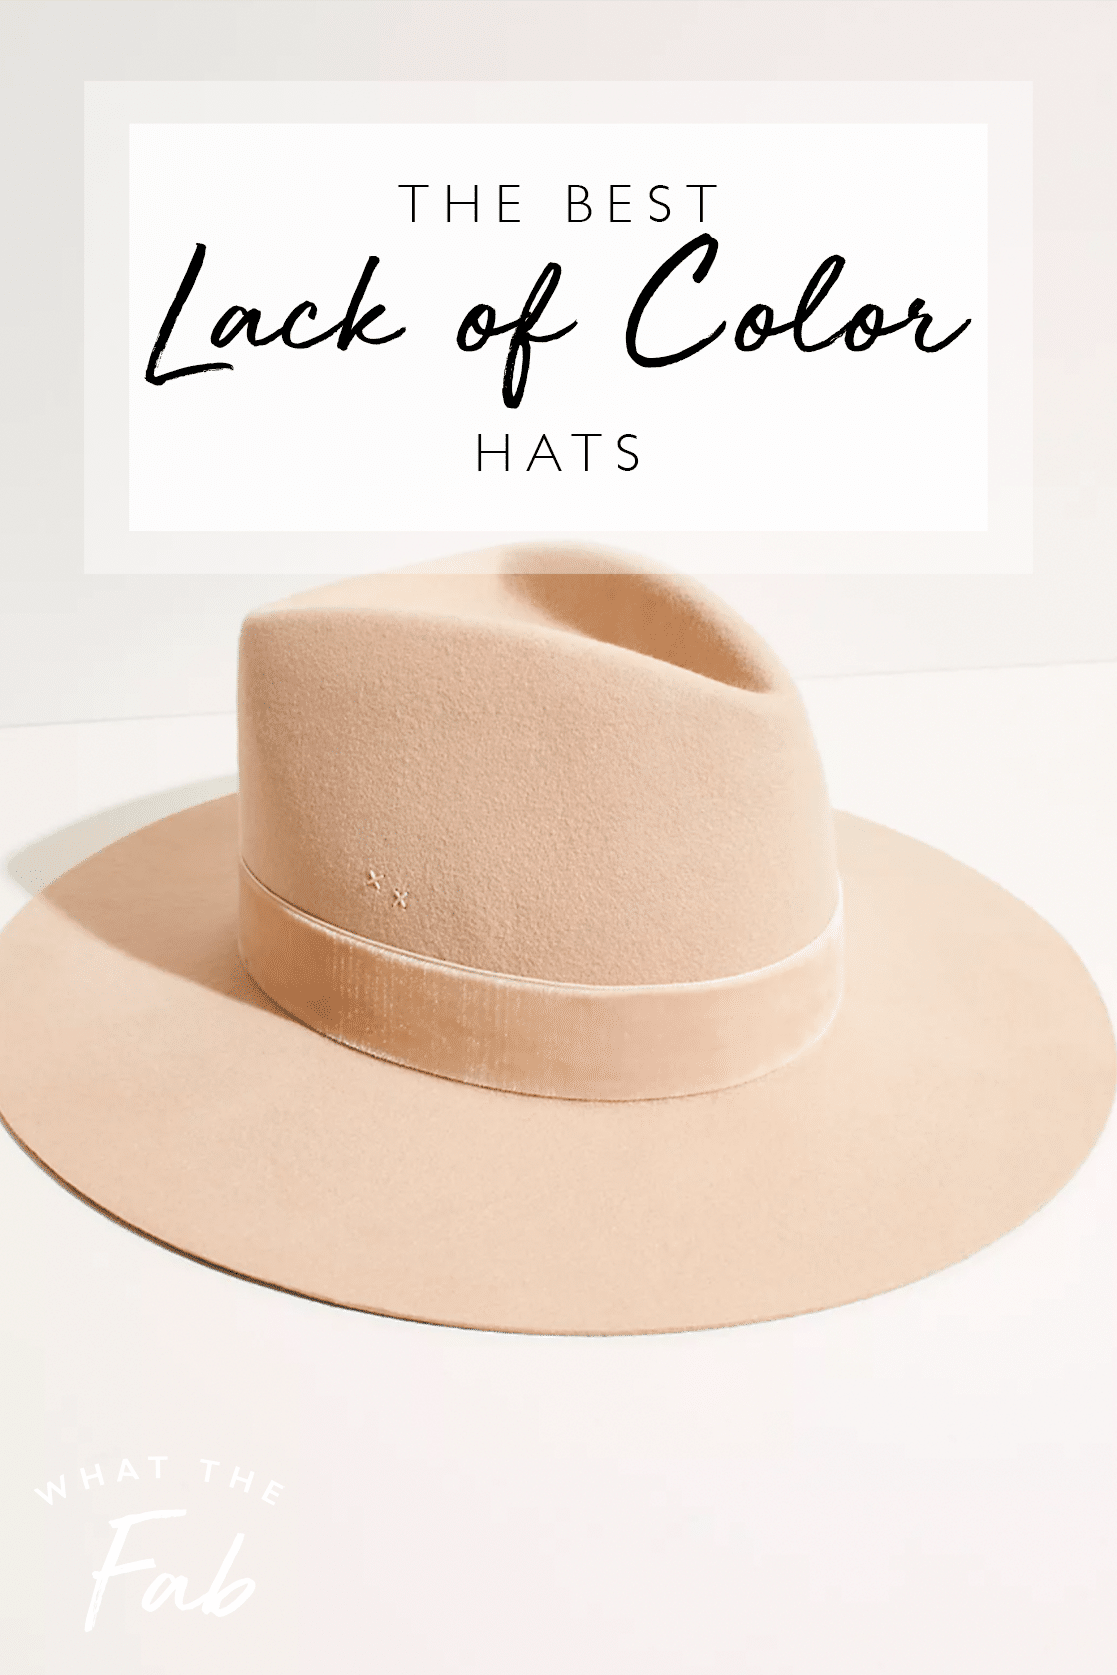 Lack of Color hats, by Blogger What The Fab